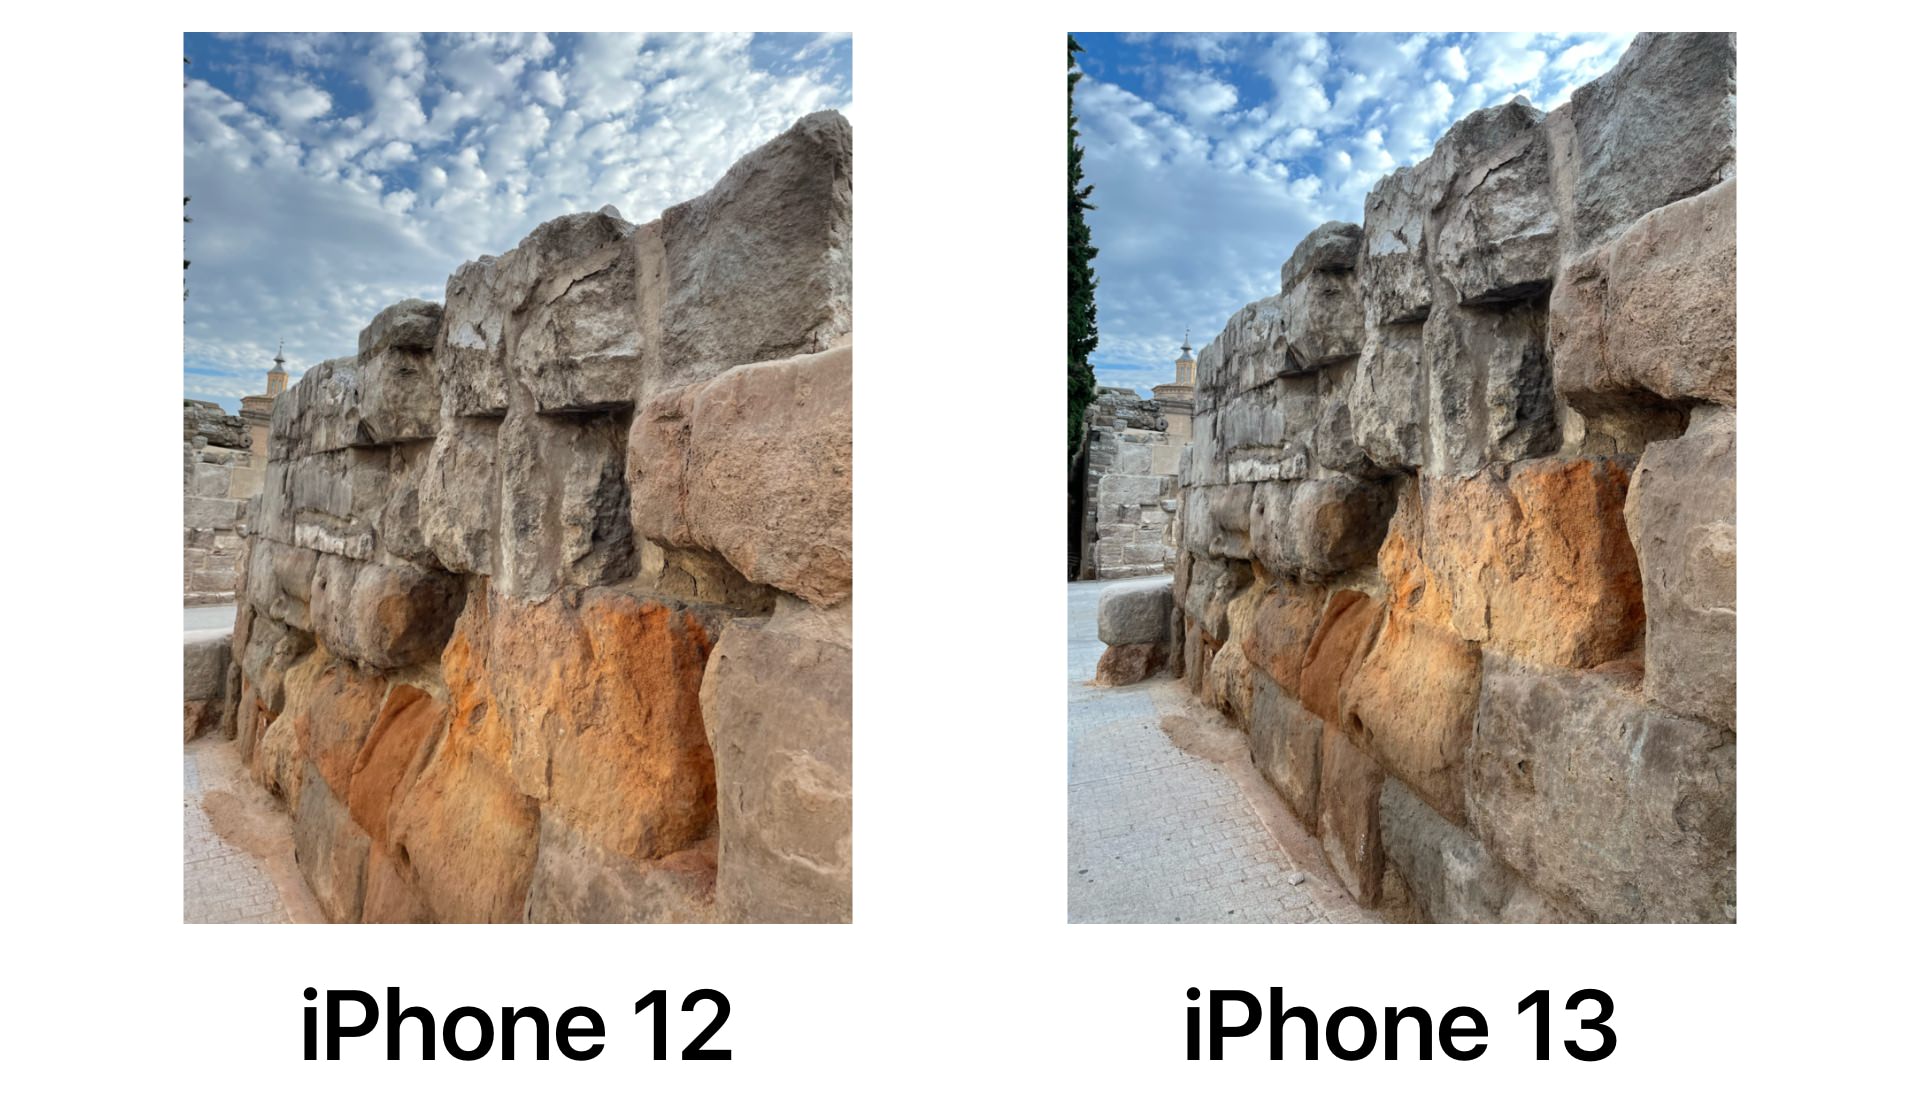 Why is iPhone 13 camera better than 12?